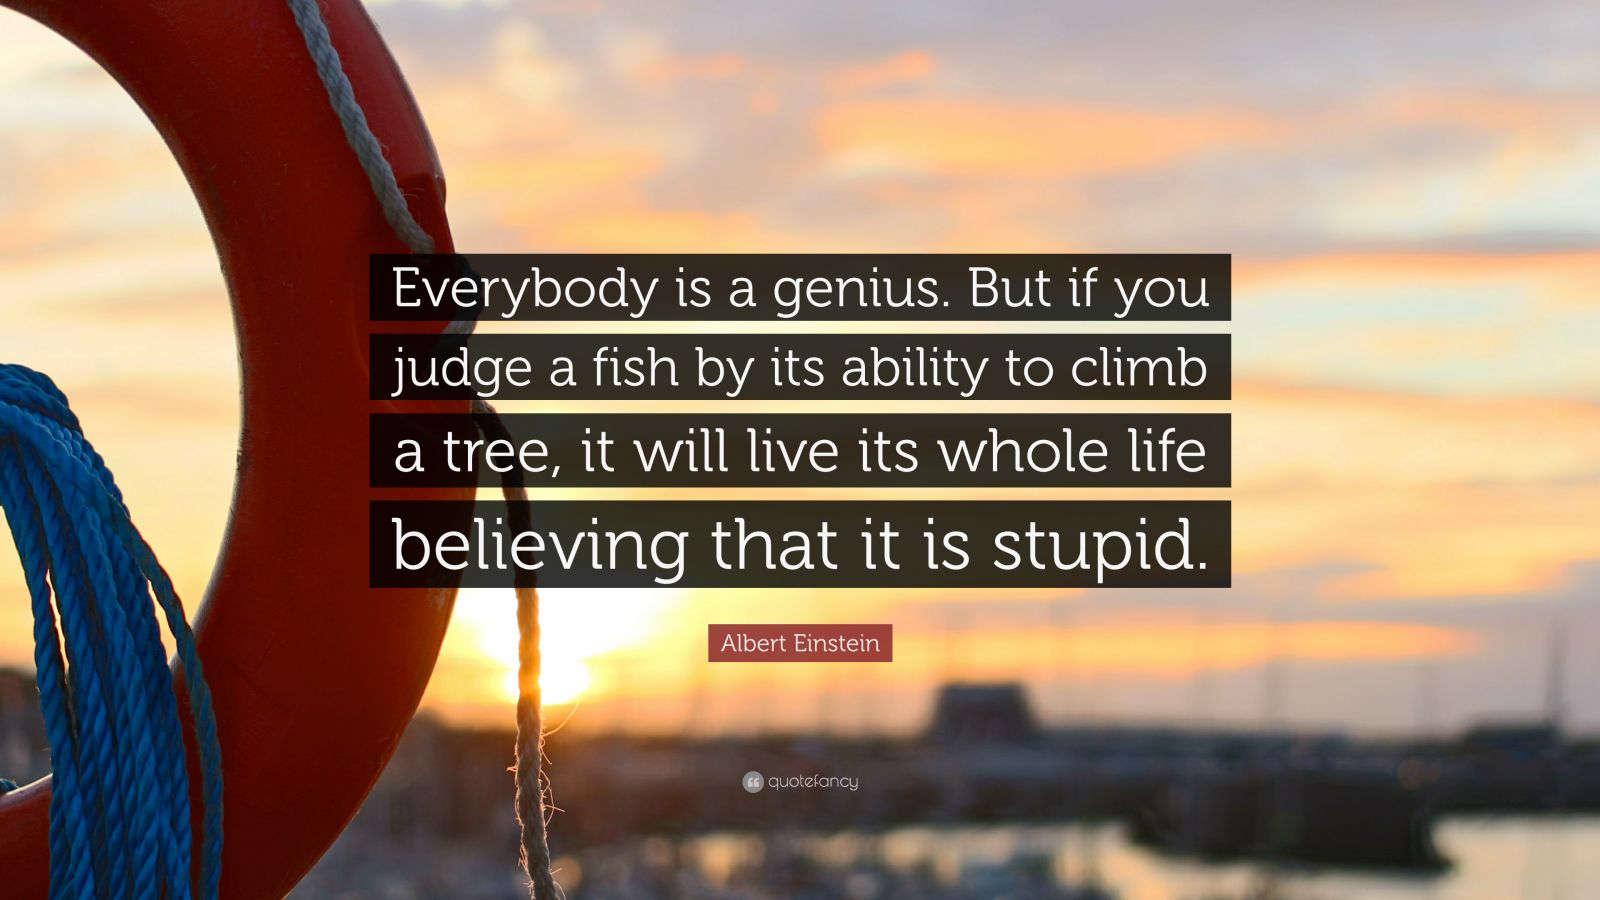 Albert Einstein Quote: “Everybody is a genius. But if you judge a fish